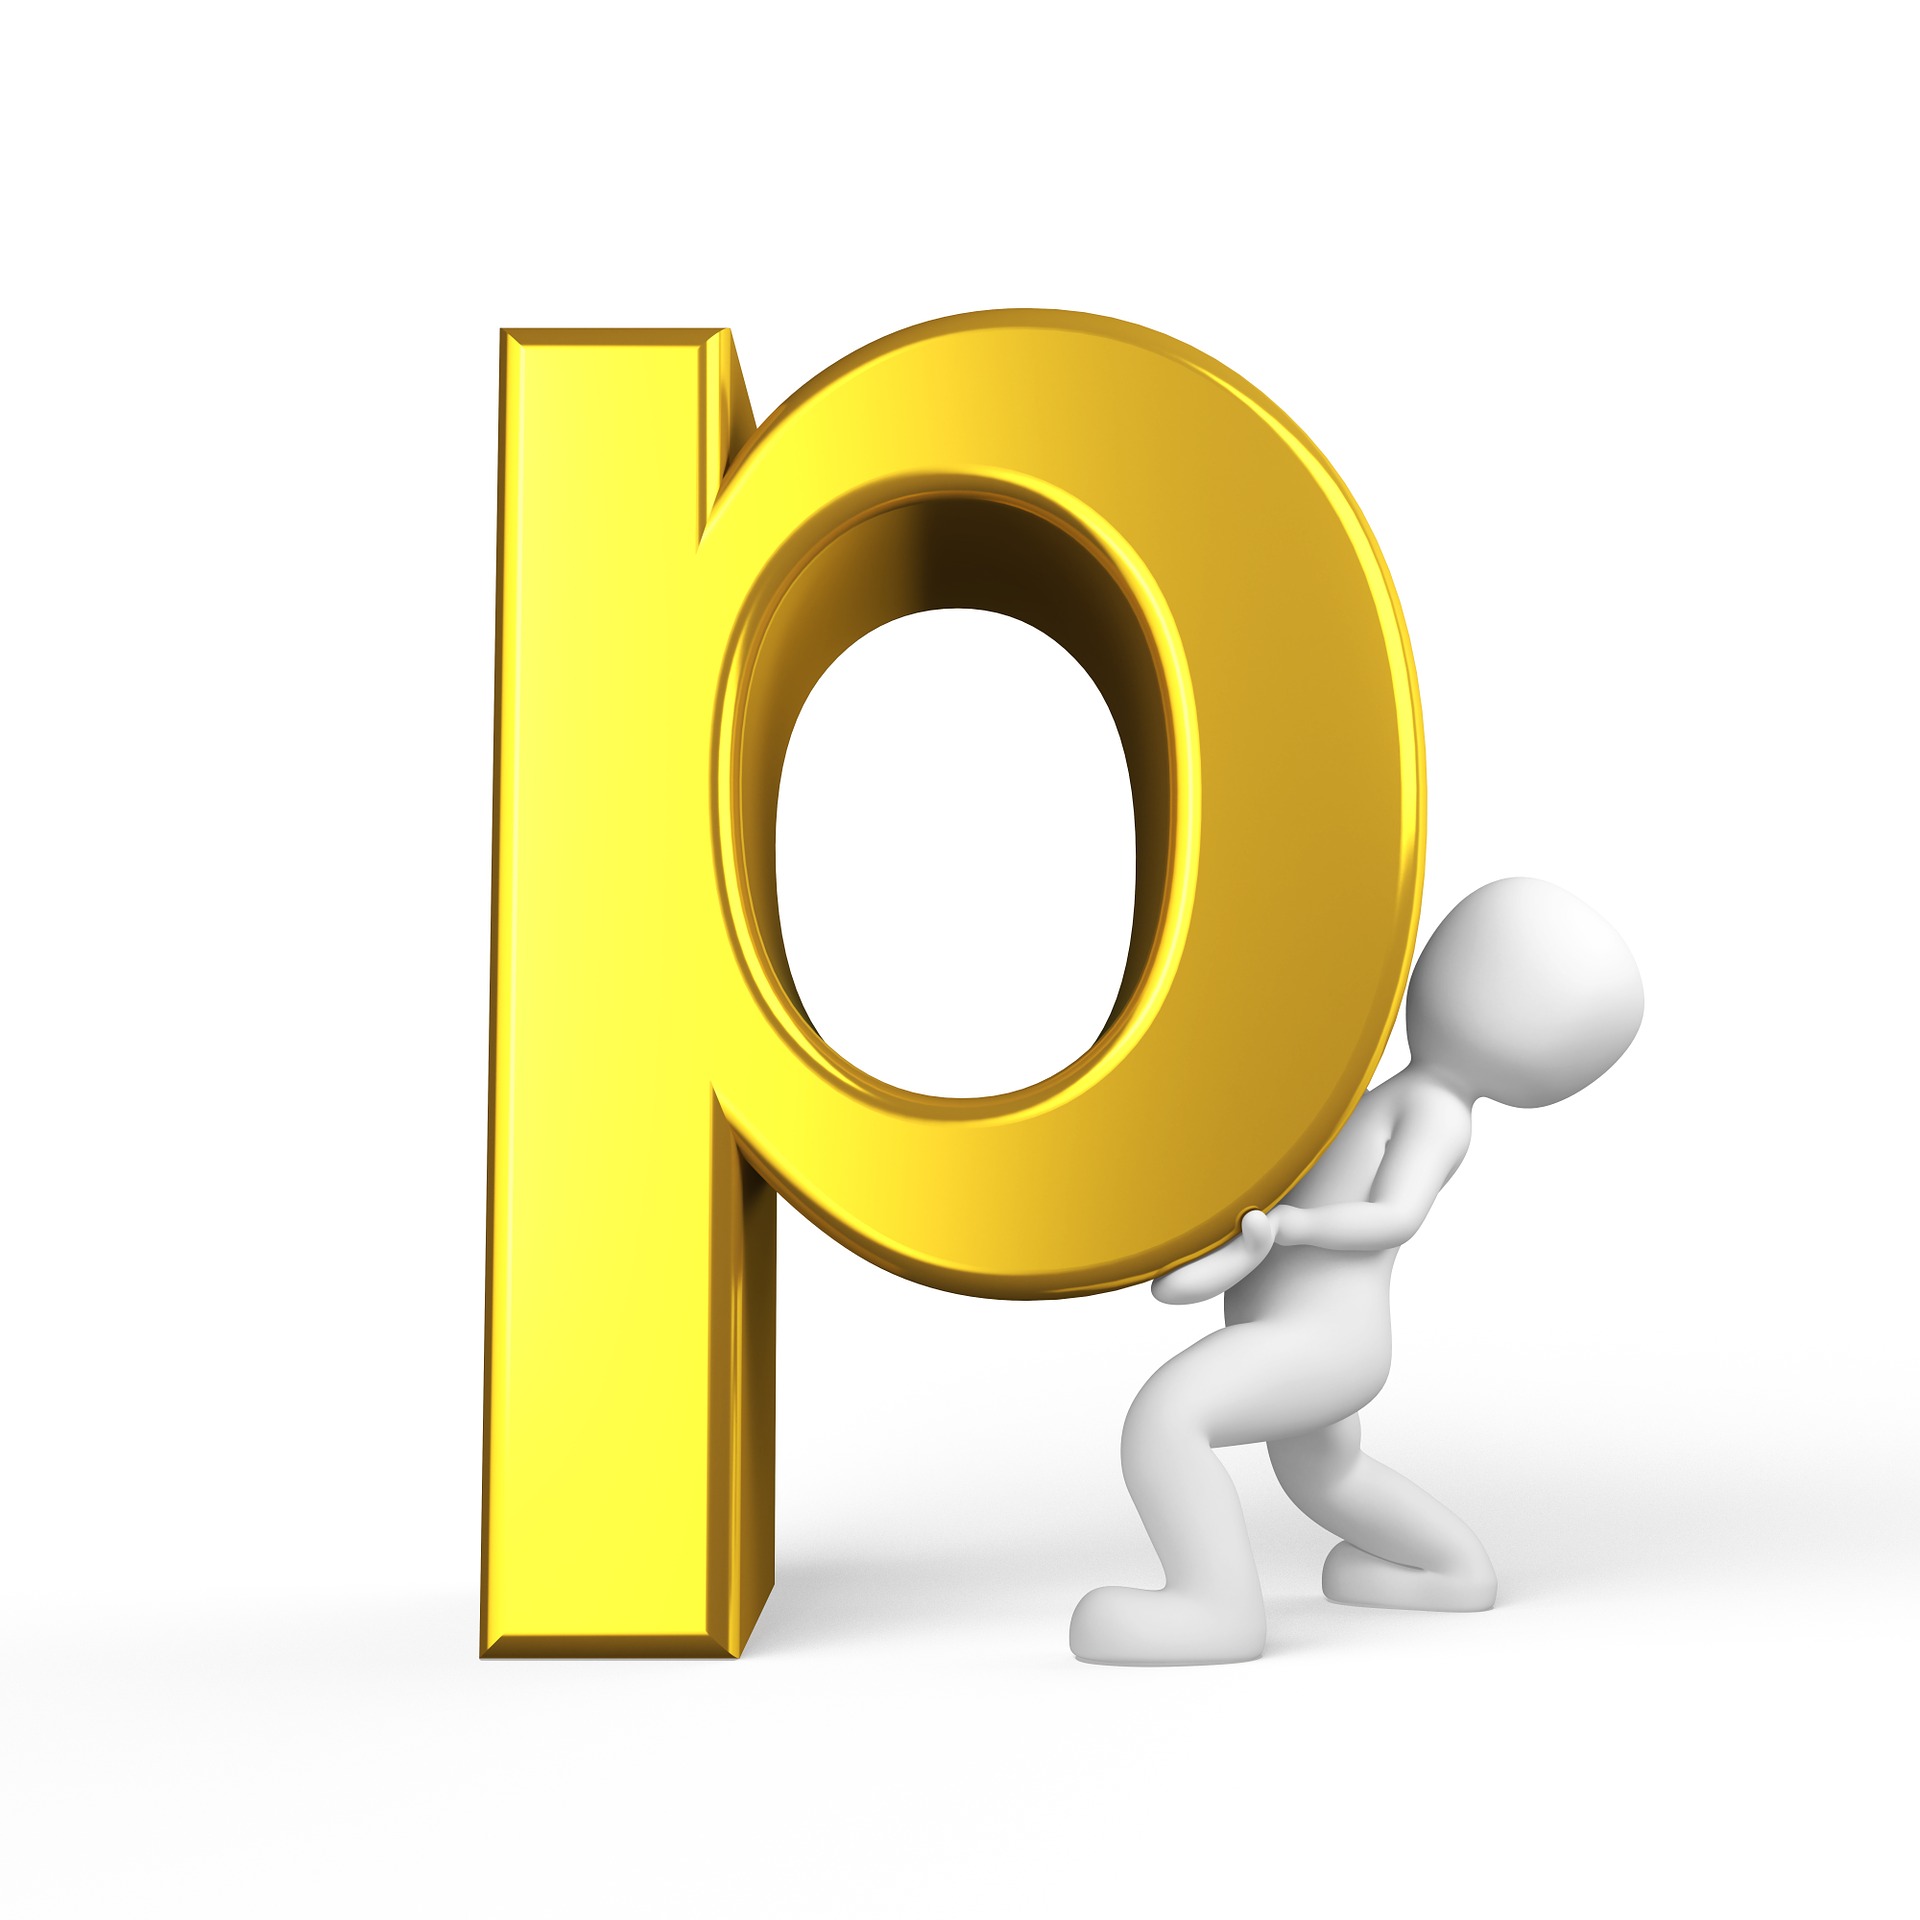 the letter "p"